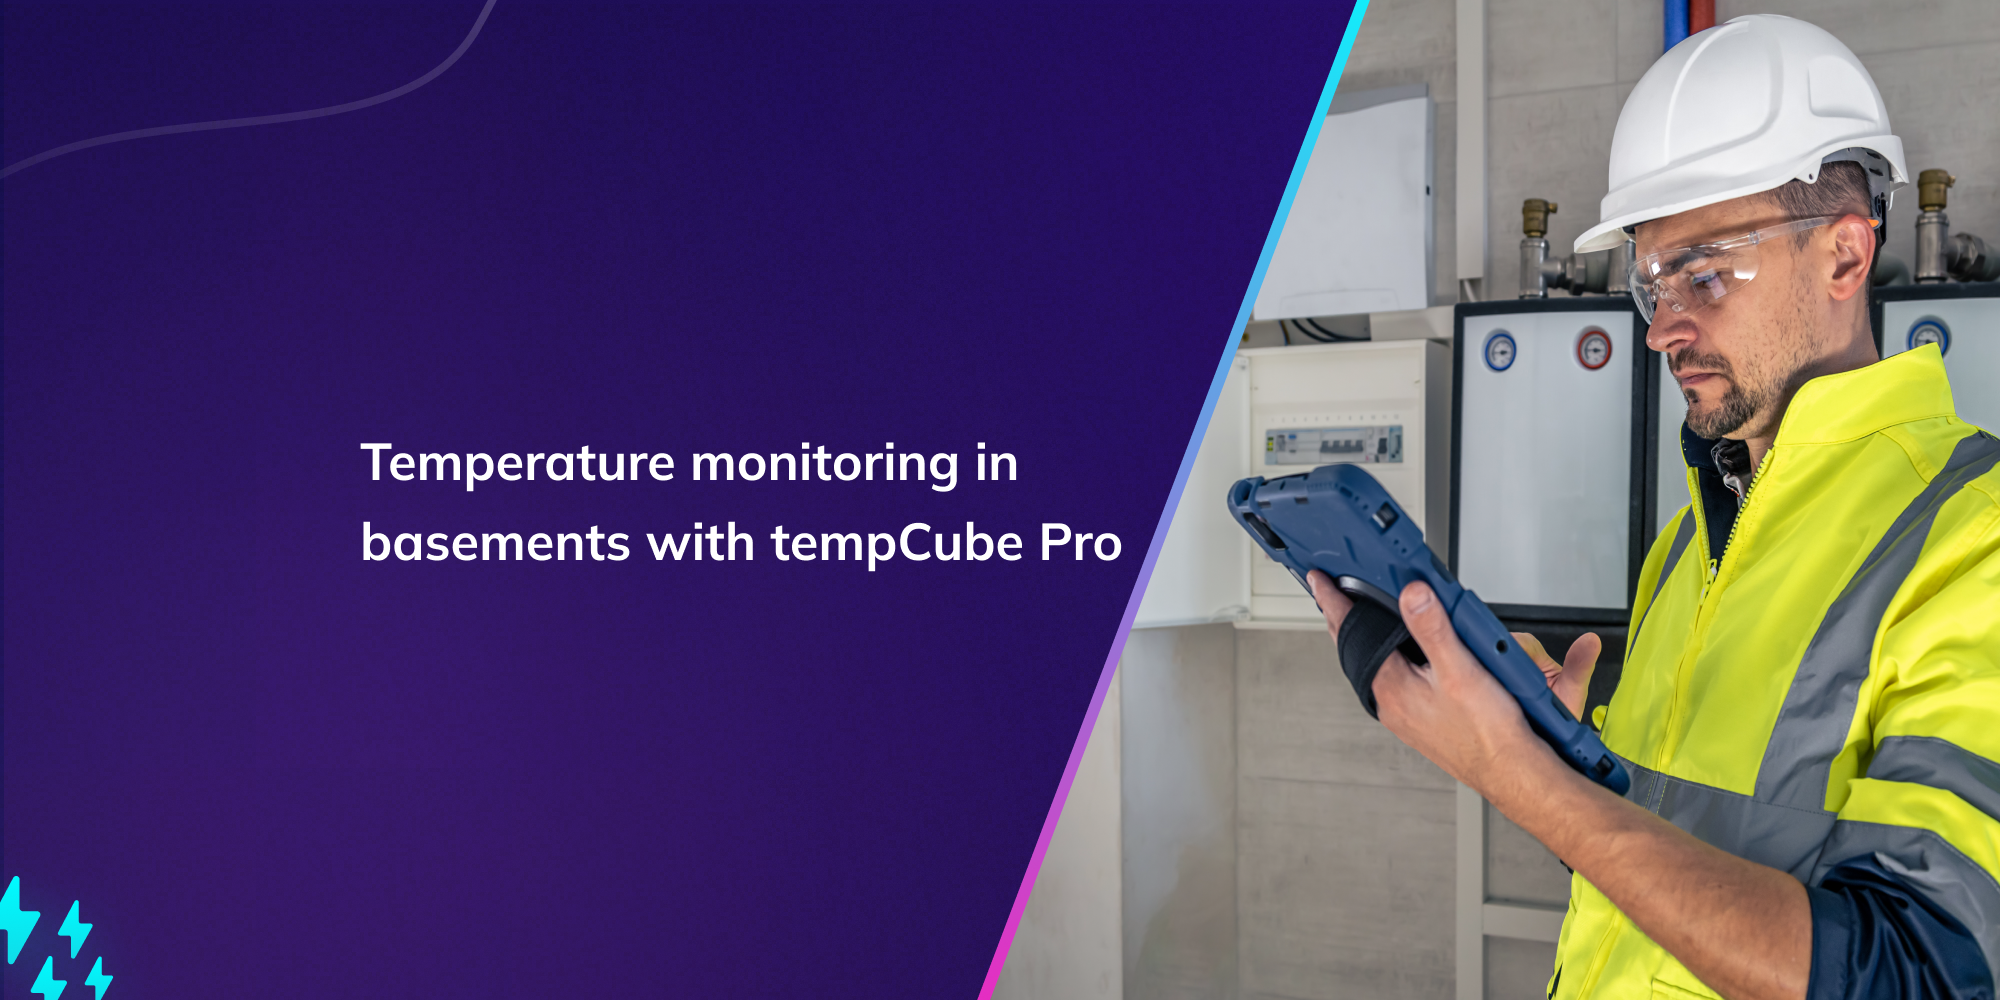 Temperature monitoring in basements with tempCube Pro